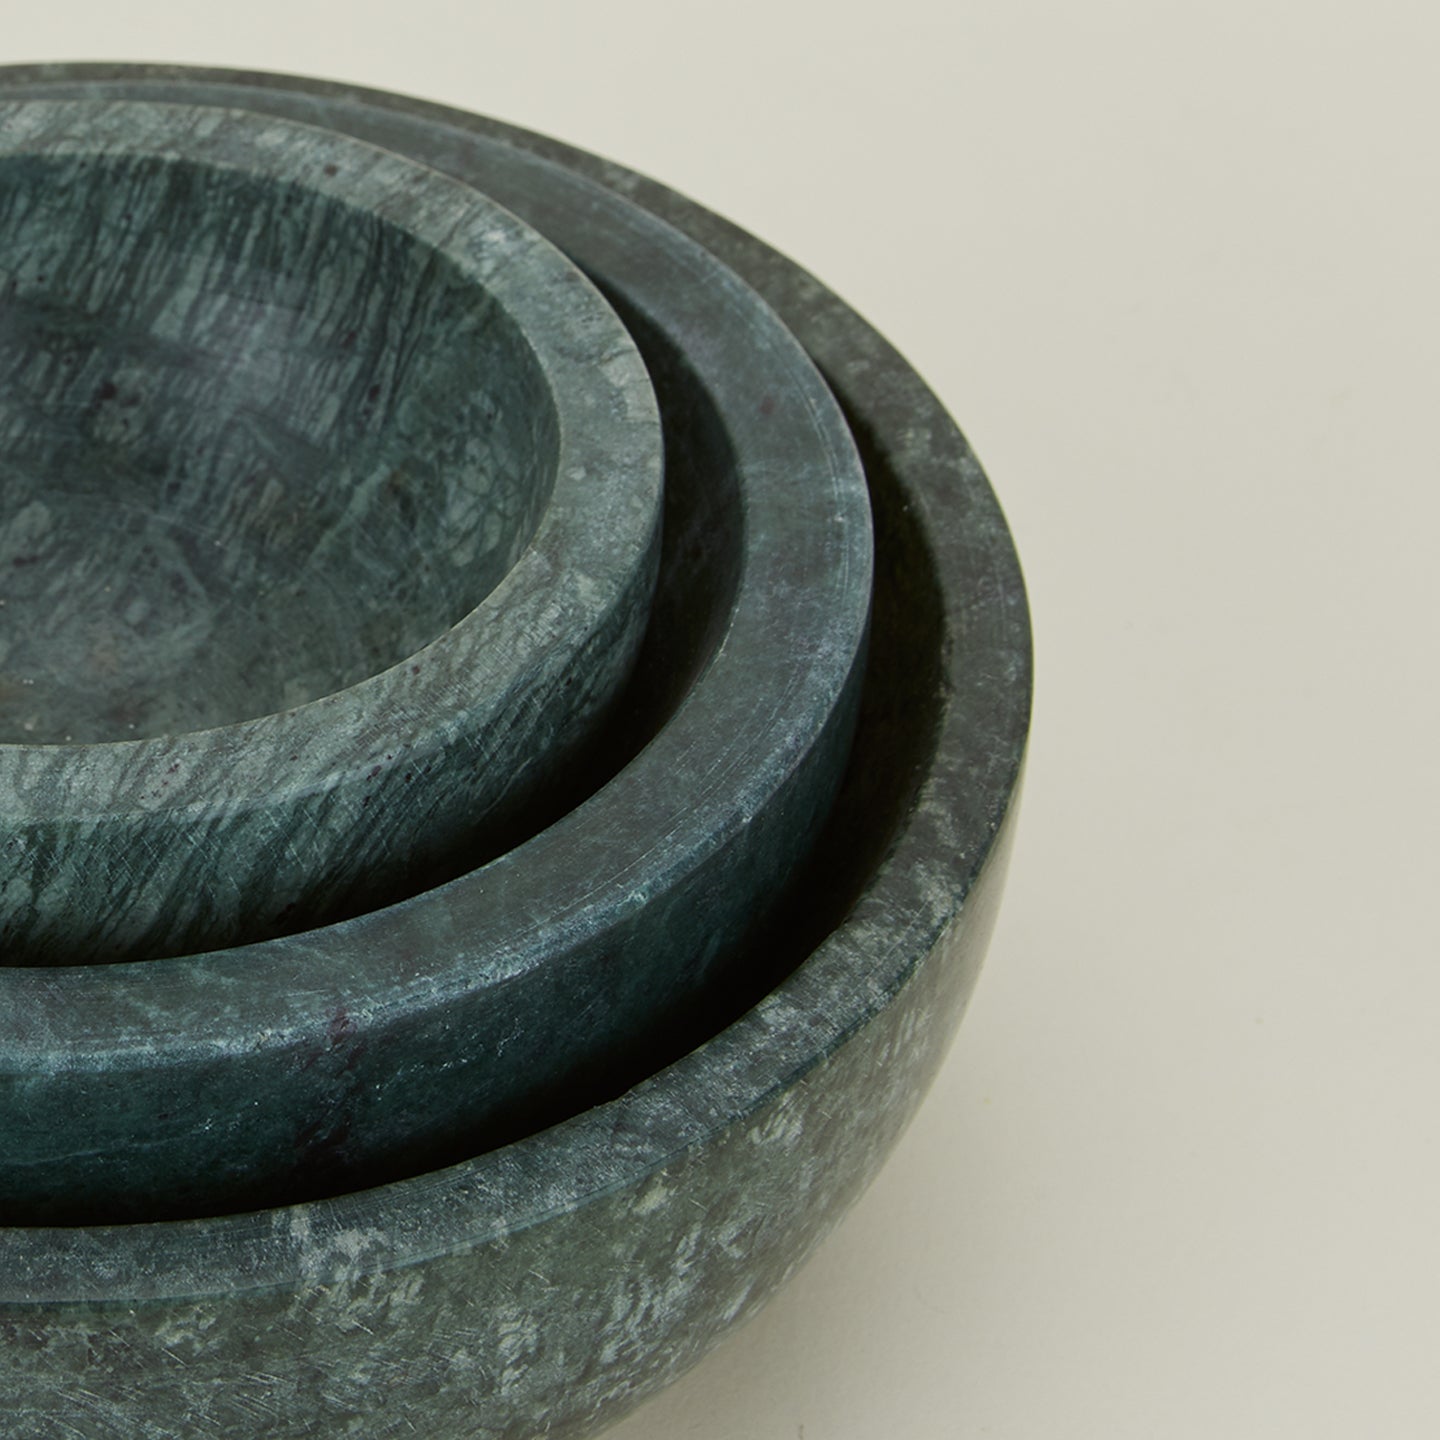 Simple Marble Bowl - Green